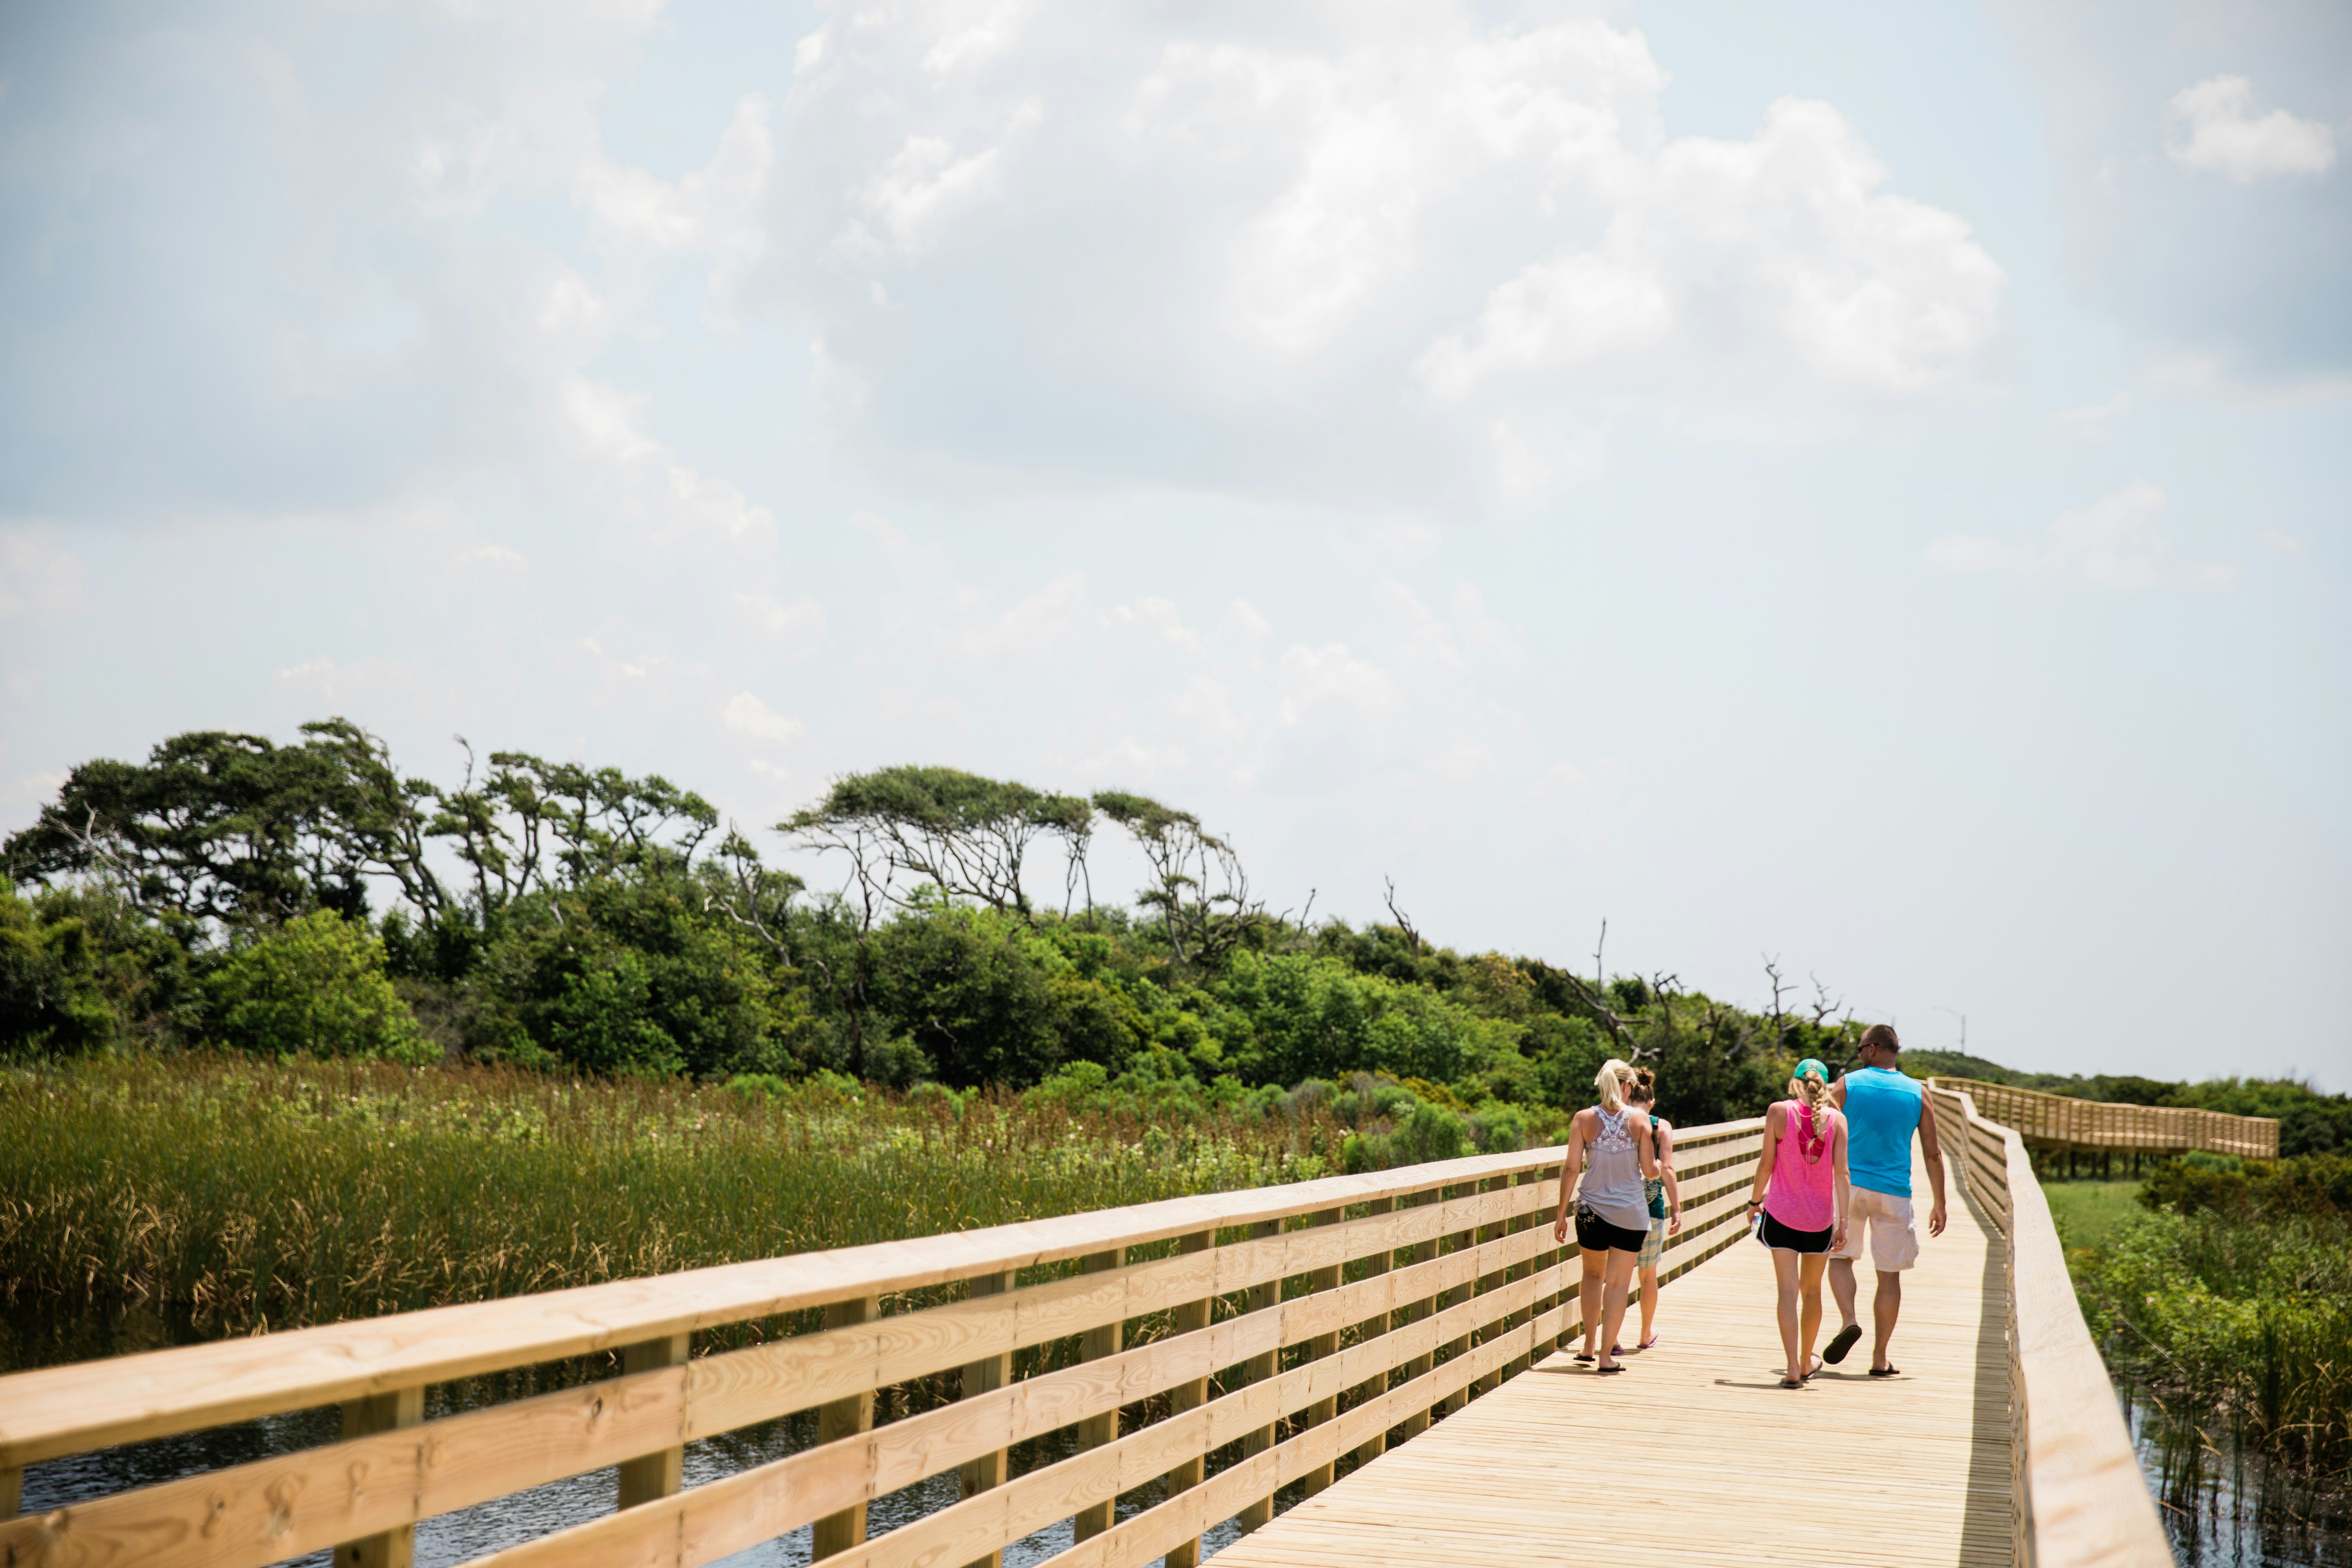 A group of people walk along a new boardwalk running over water and marshland. 